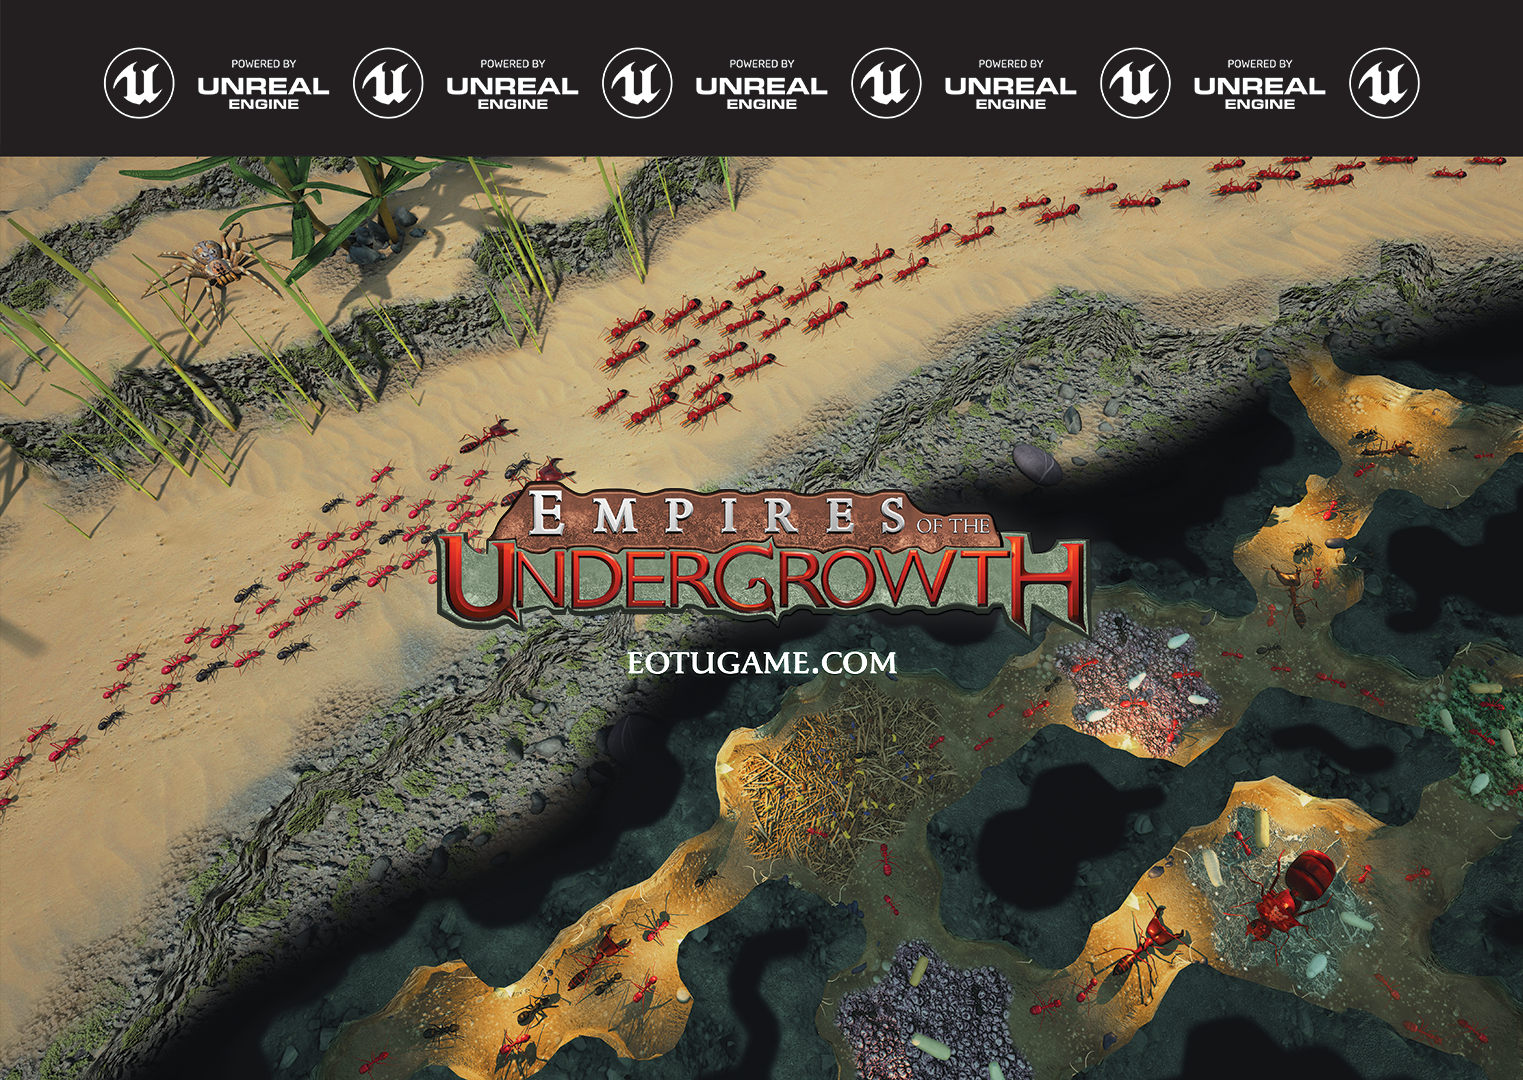 empire of the undergrowth torrent download